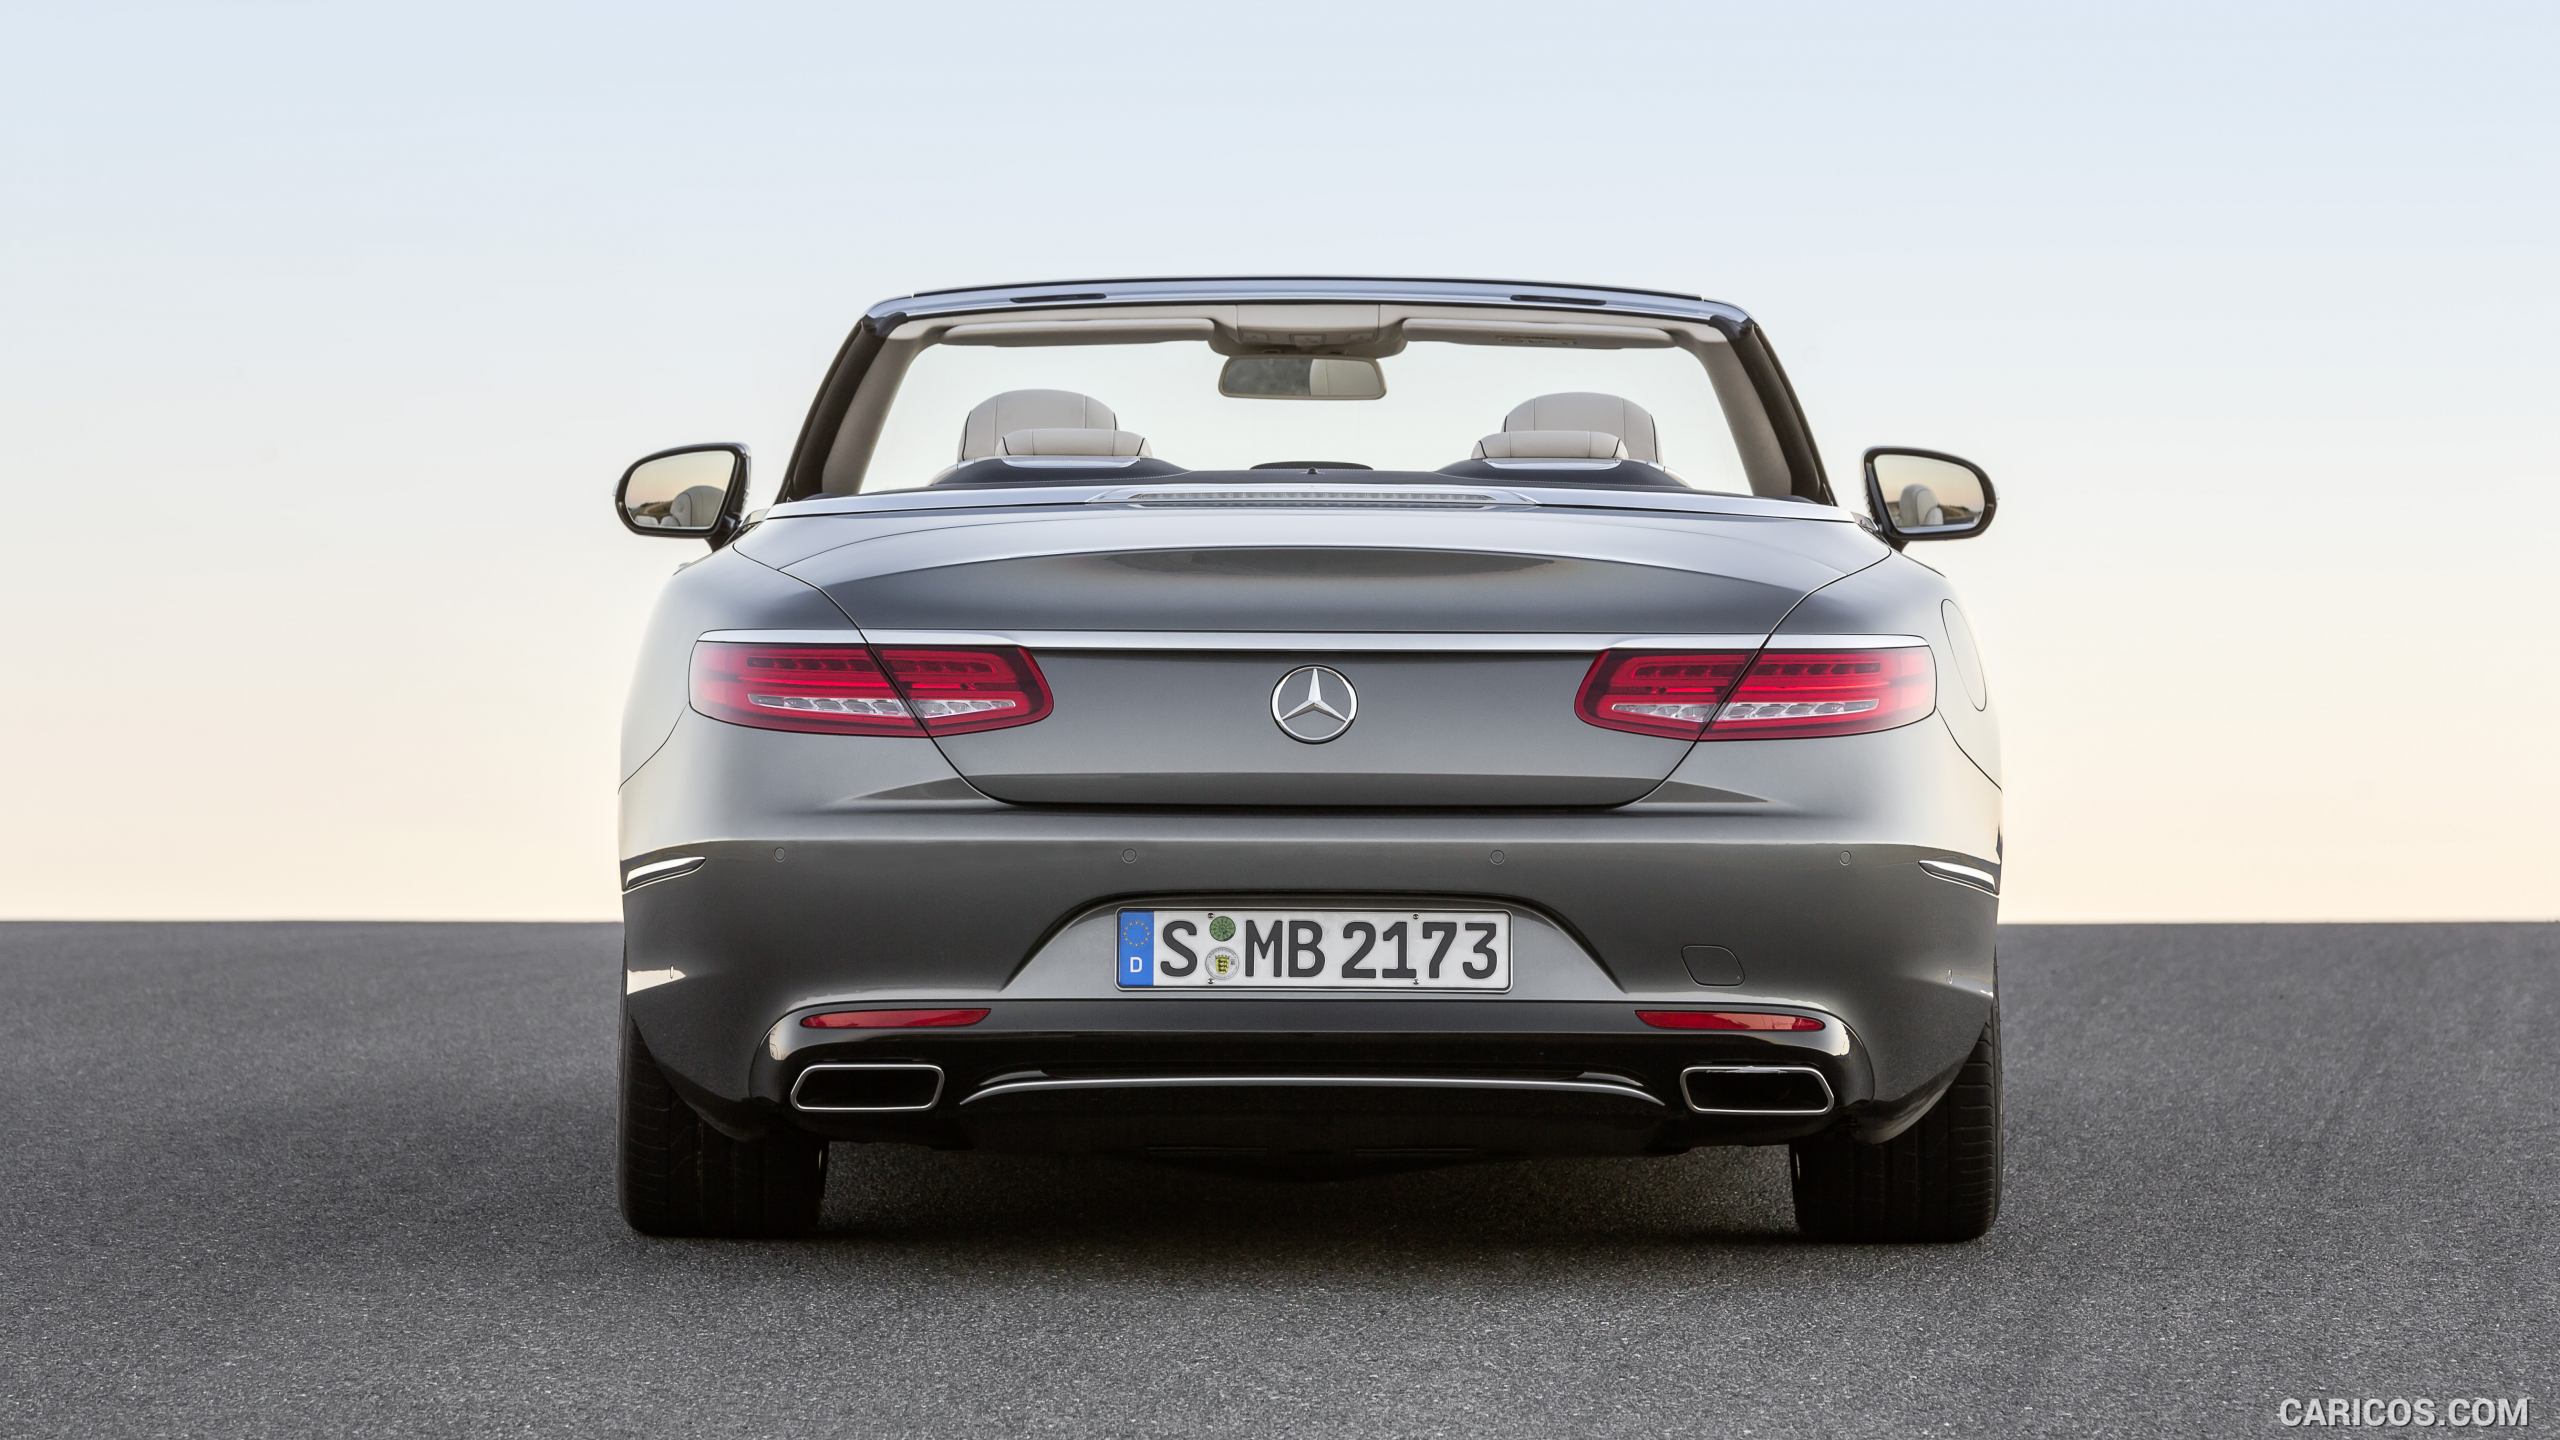 2017 Mercedes-Benz S-Class S500 Cabriolet (Selenit Grey) - Rear, #17 of 56